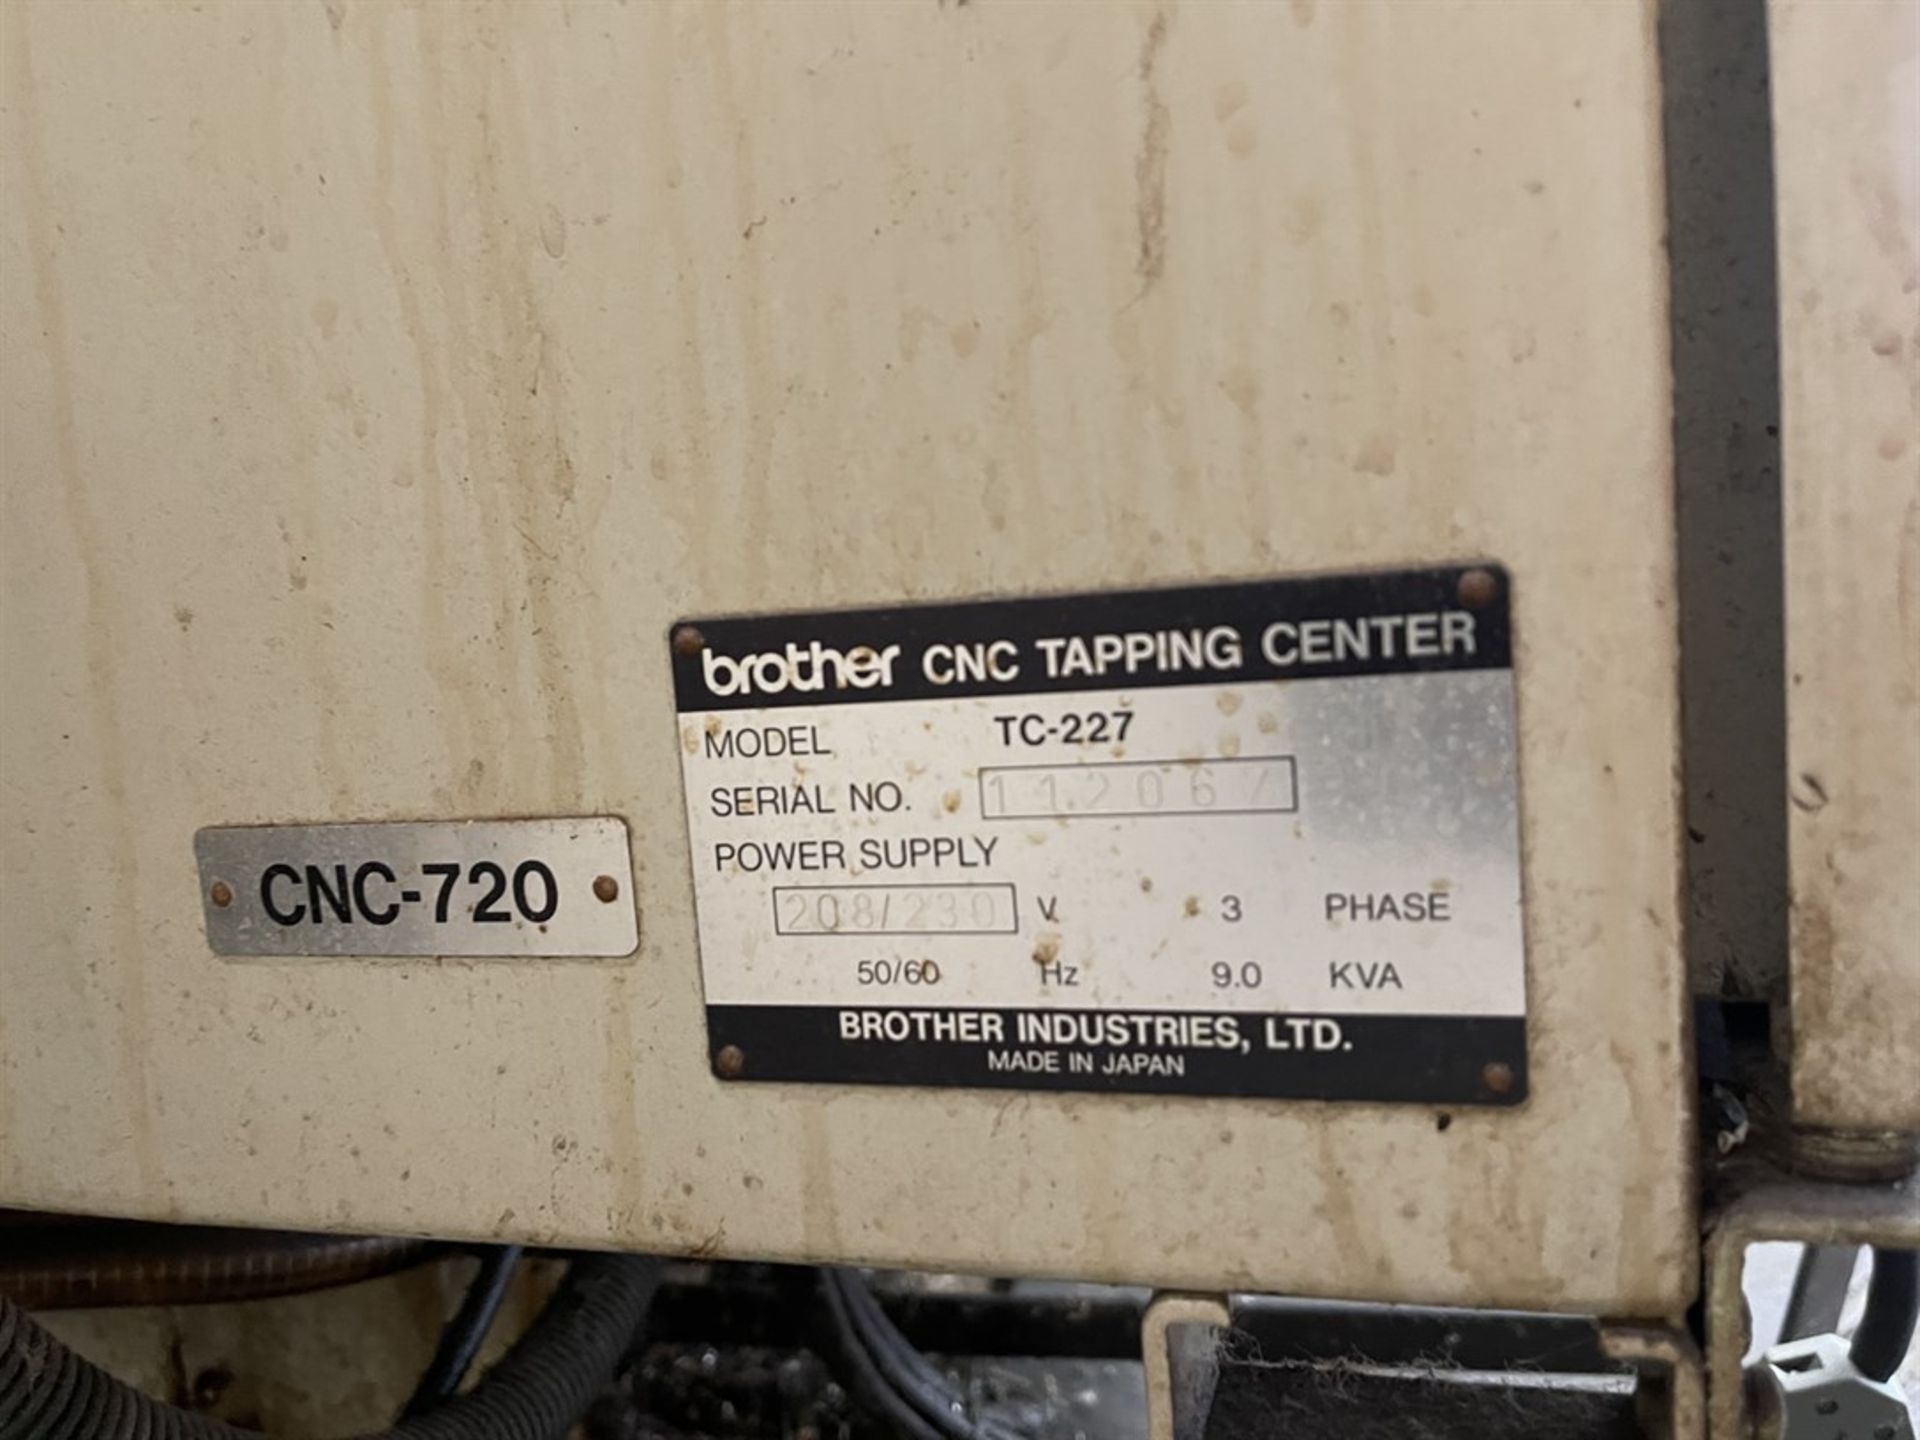 BROTHER TC-227 CNC Drilling & Tapping Center, s/n 112067, CNC-720 Control, 16.5” X, 11.8” Y, 9.8” Z, - Image 6 of 6